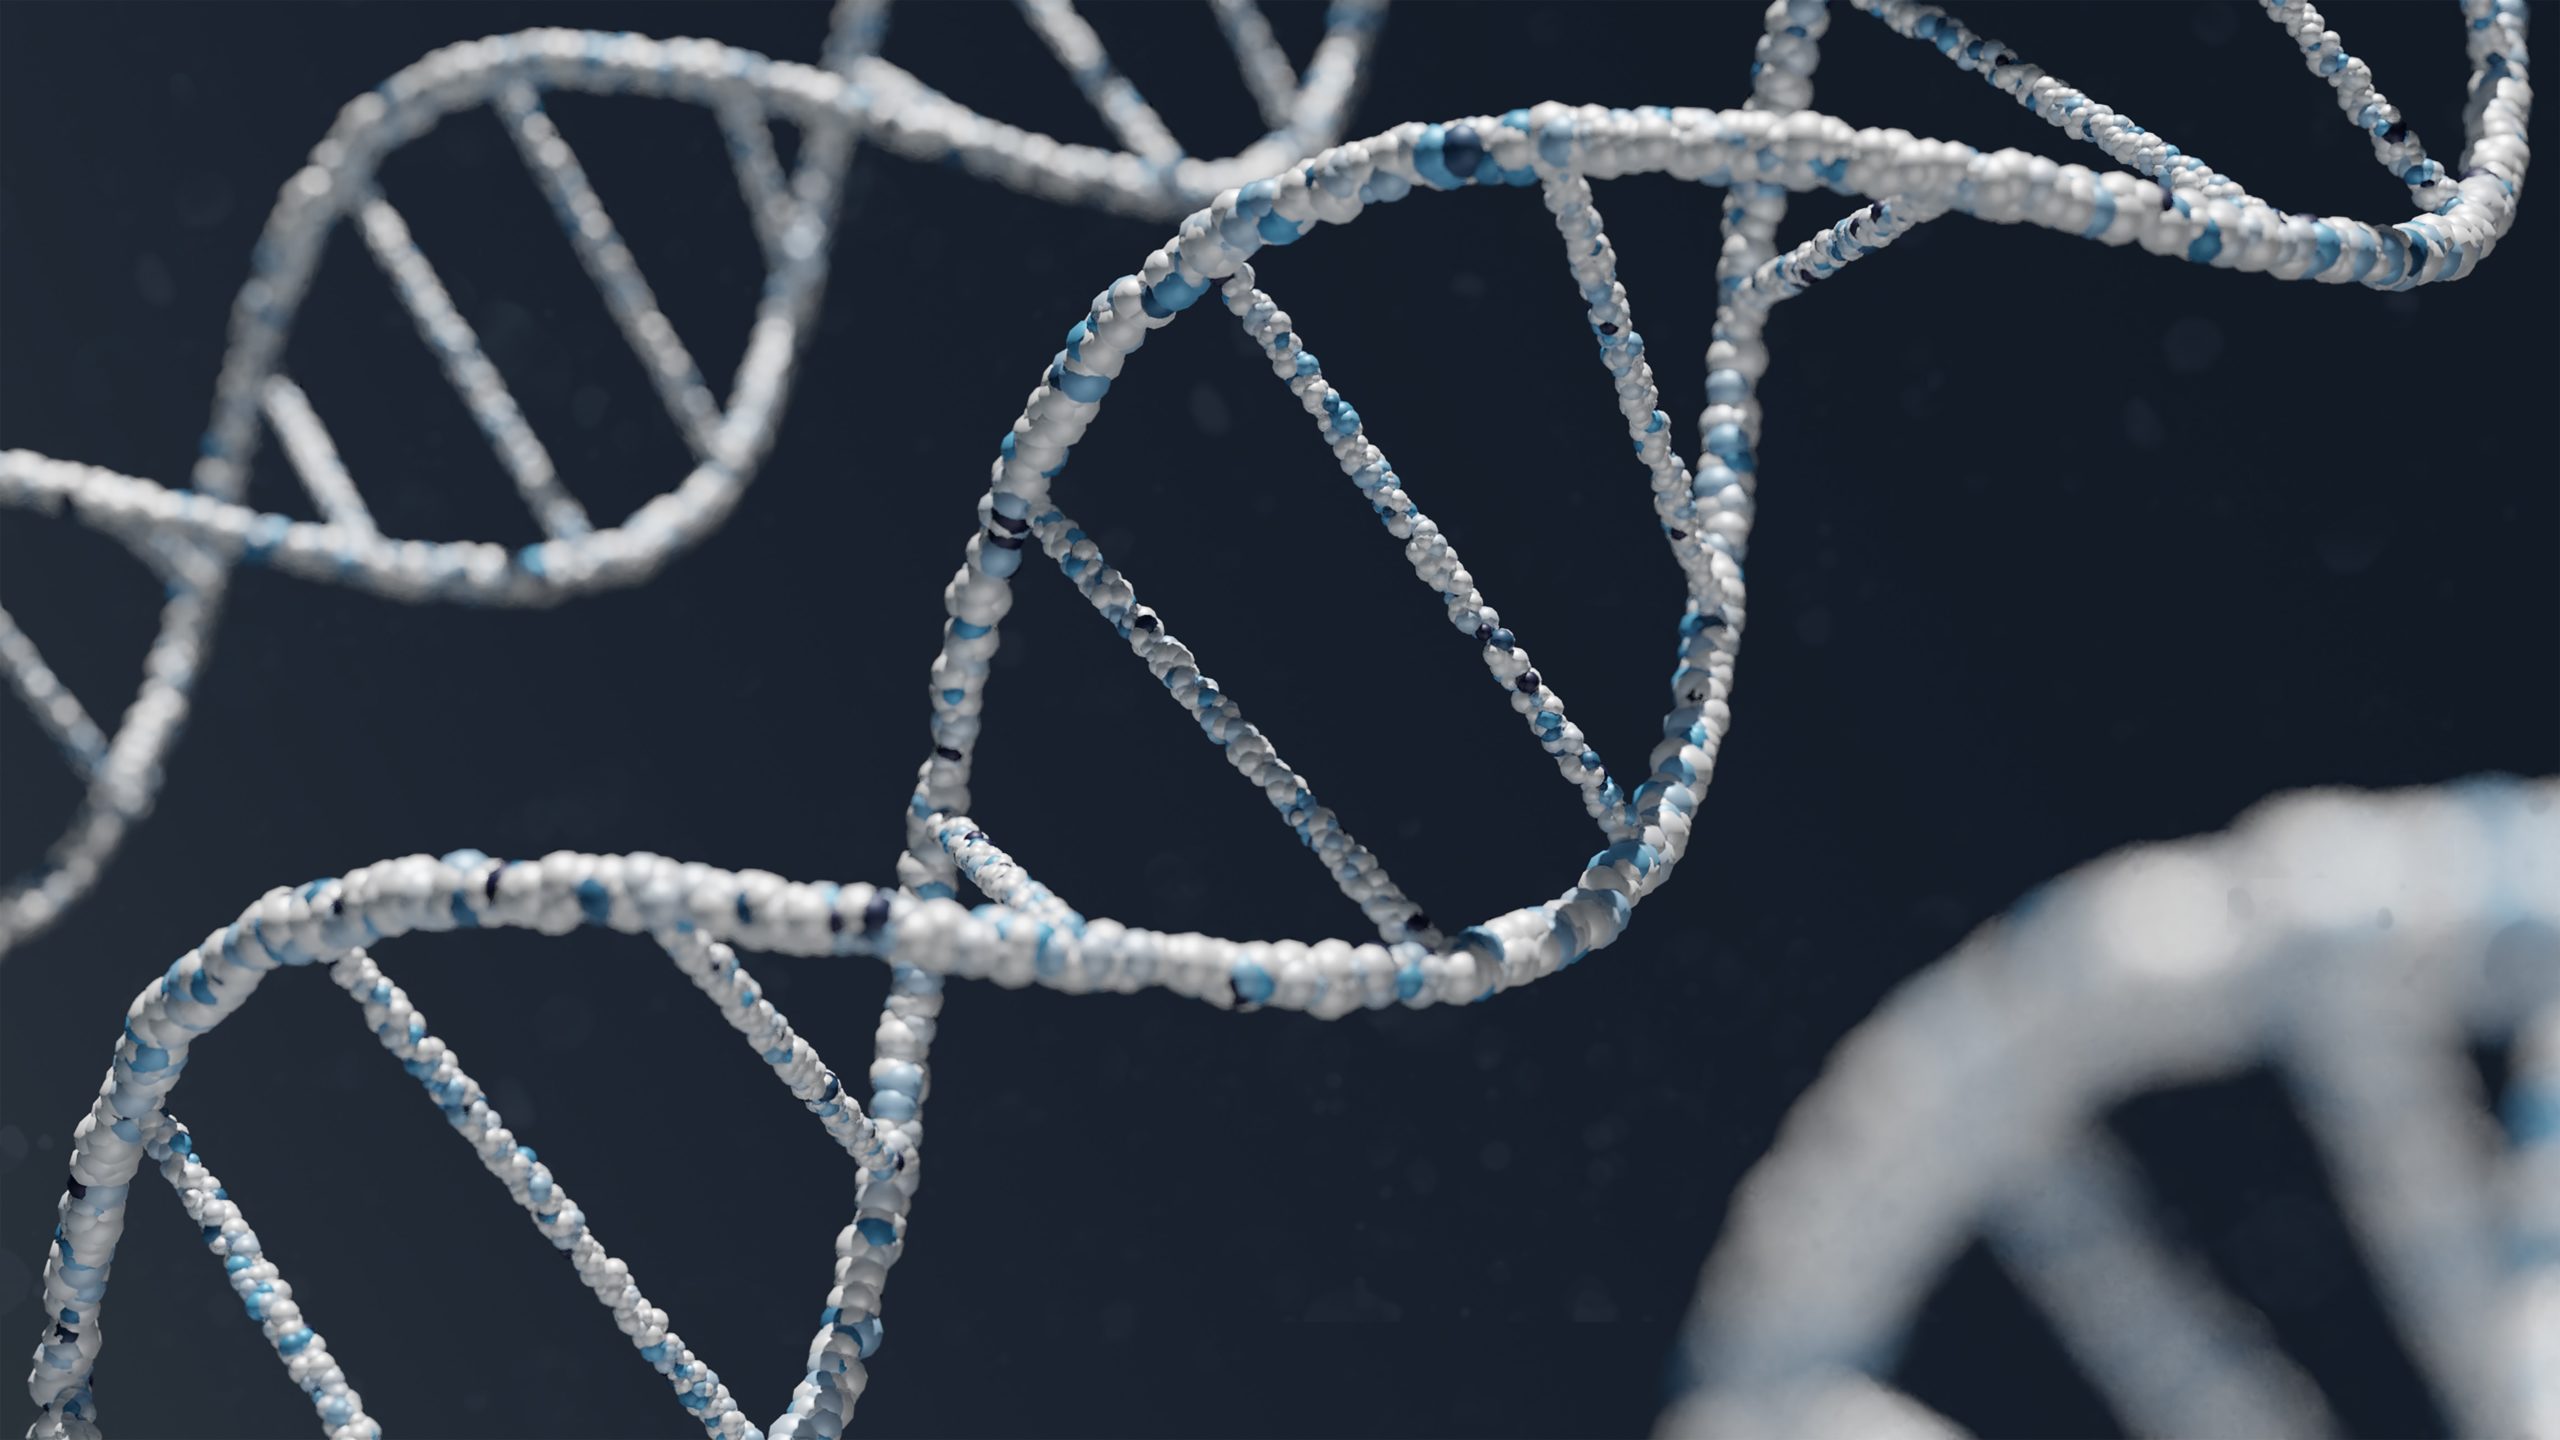 Local Police Departments are Building Private DNA Databases